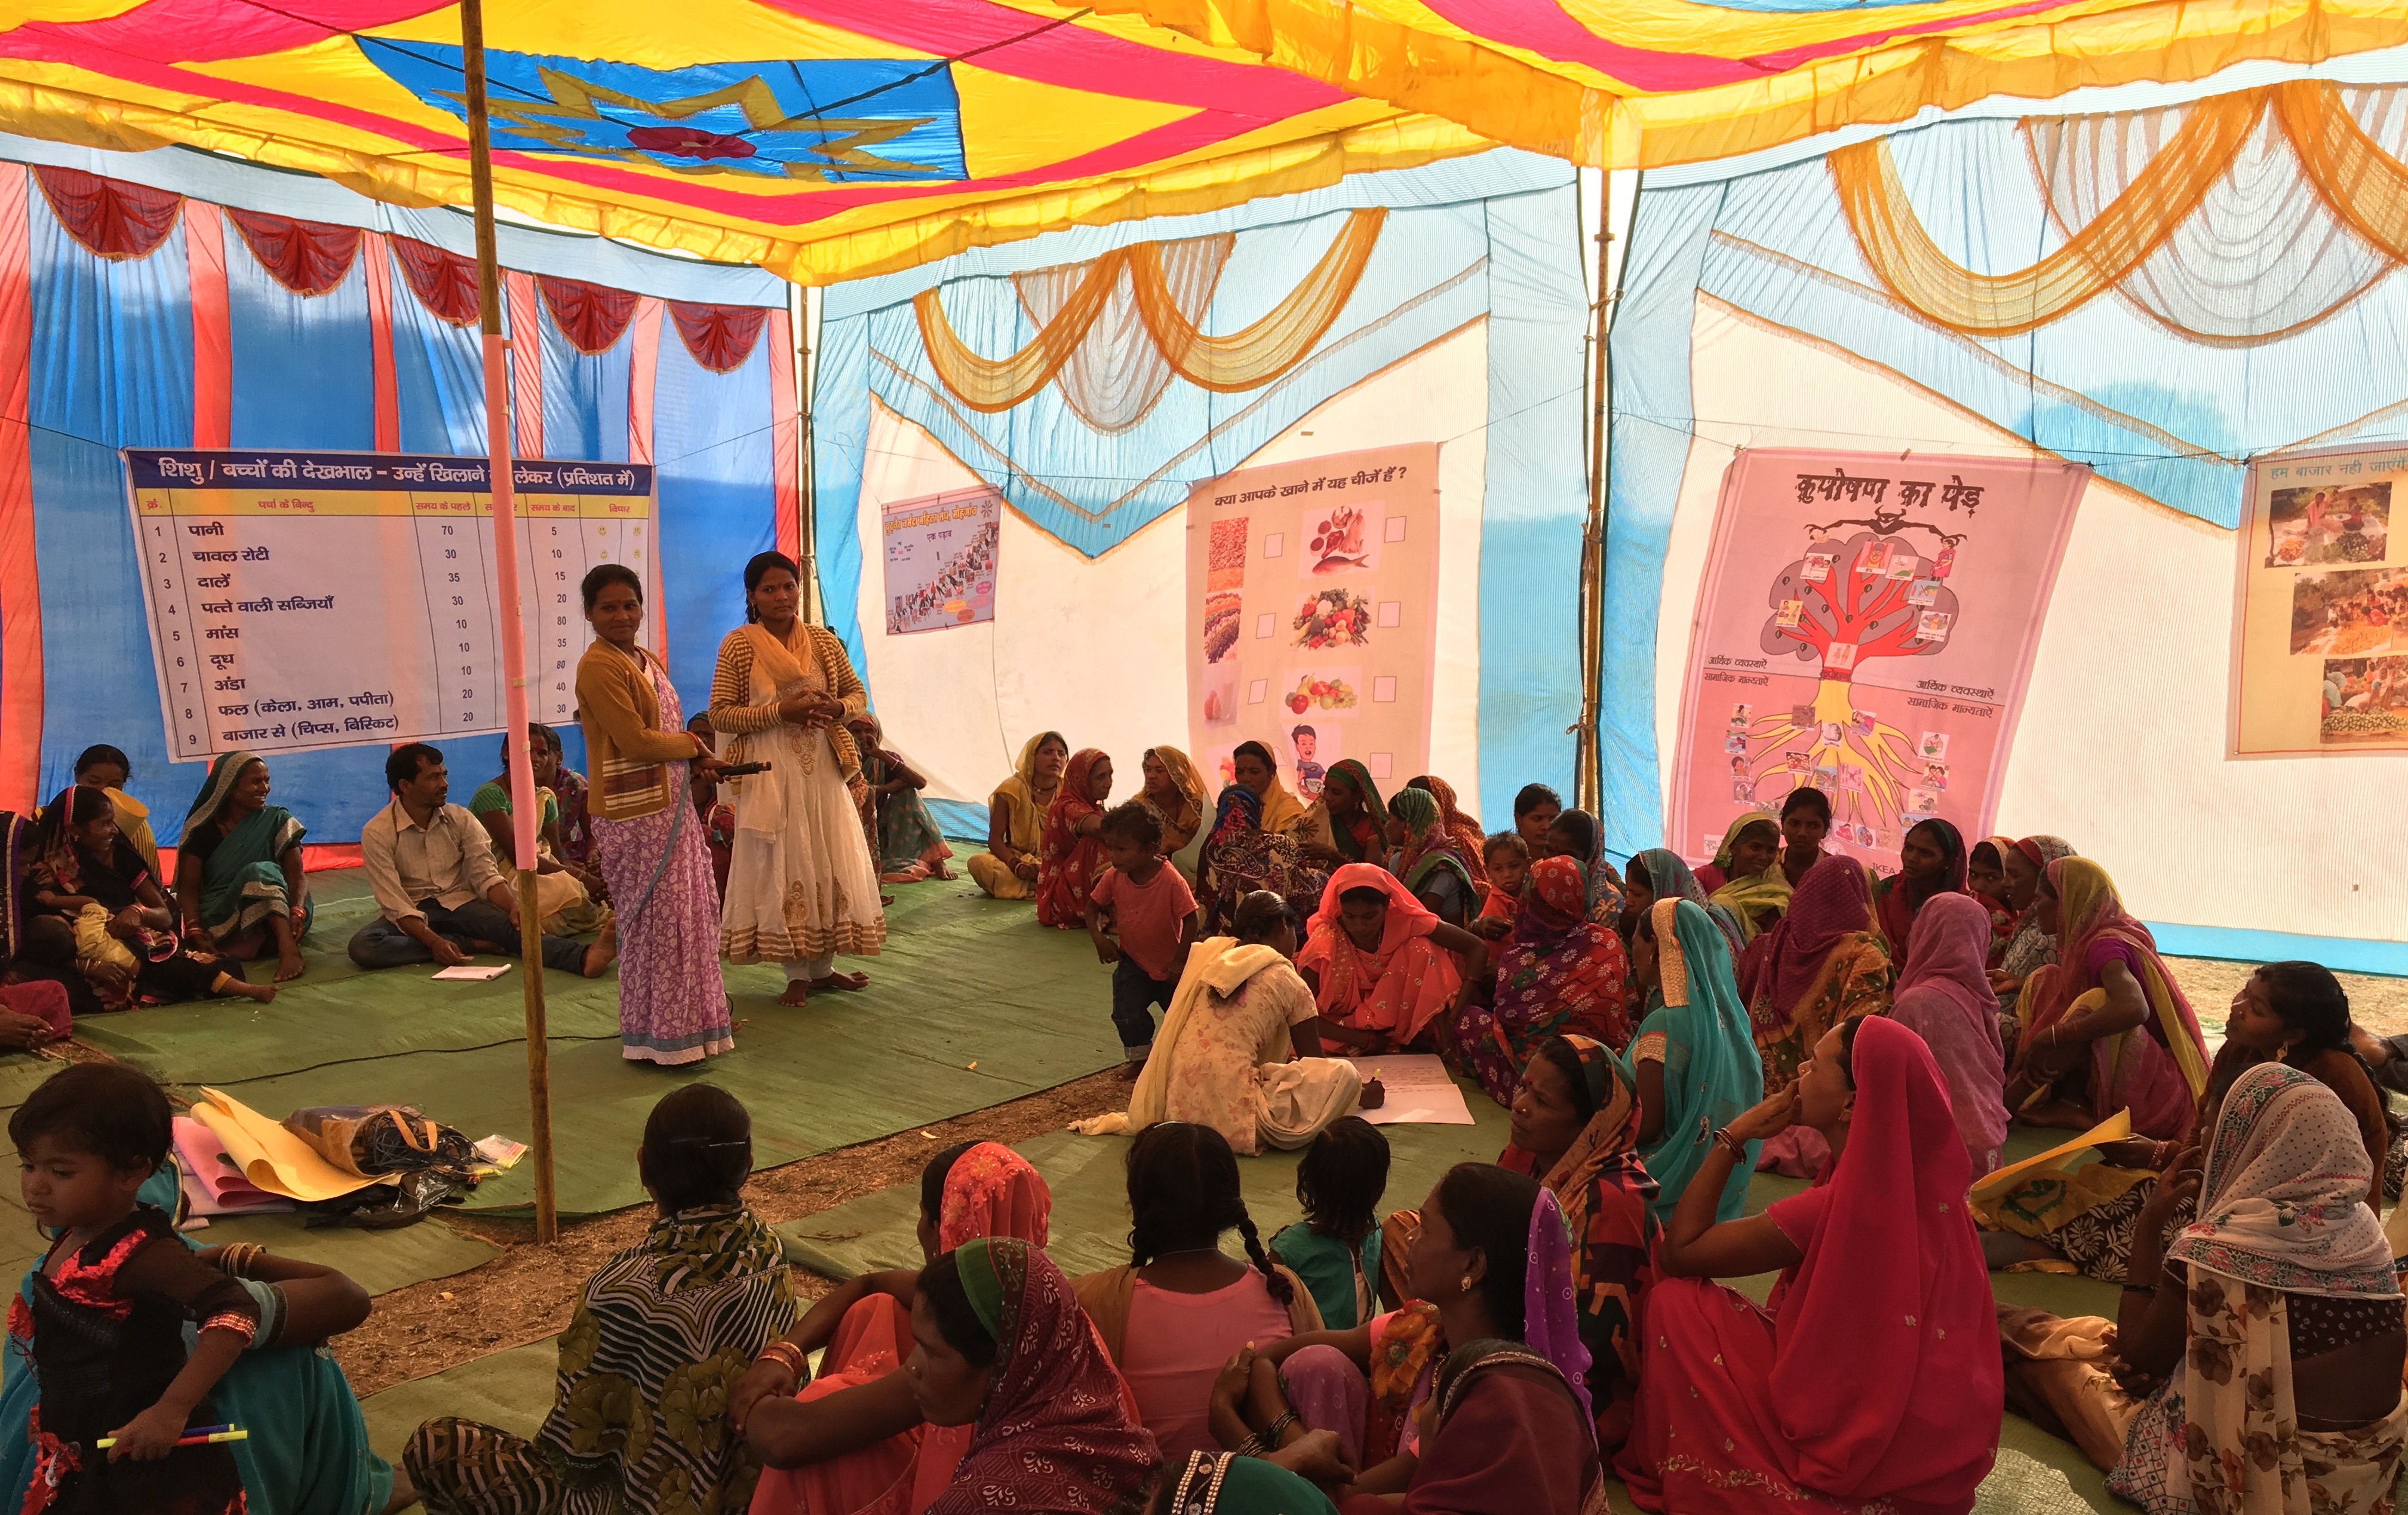 International Women's Day: Self-help groups aid communication, empowerment in India